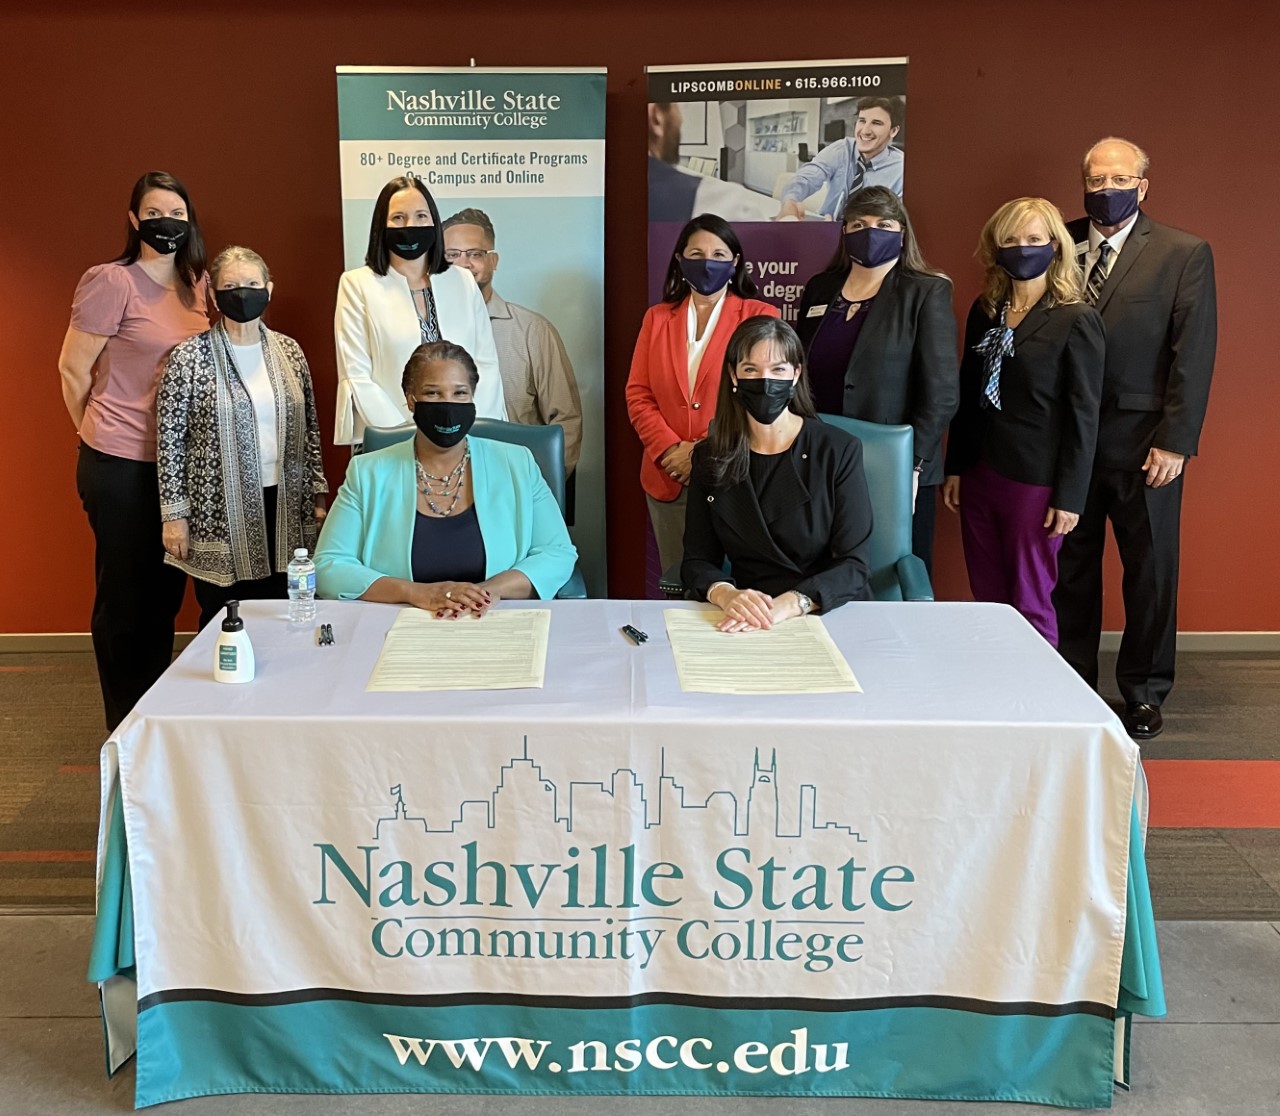 Nashville State Community College President Dr. Shanna L. Jackson and Lipscomb University President Dr. Candice McQueen signing an articulation agreement providing a pathway to a bachelor's degree at Lipscomb Online for graduating Nashville State students who want to continue their education.